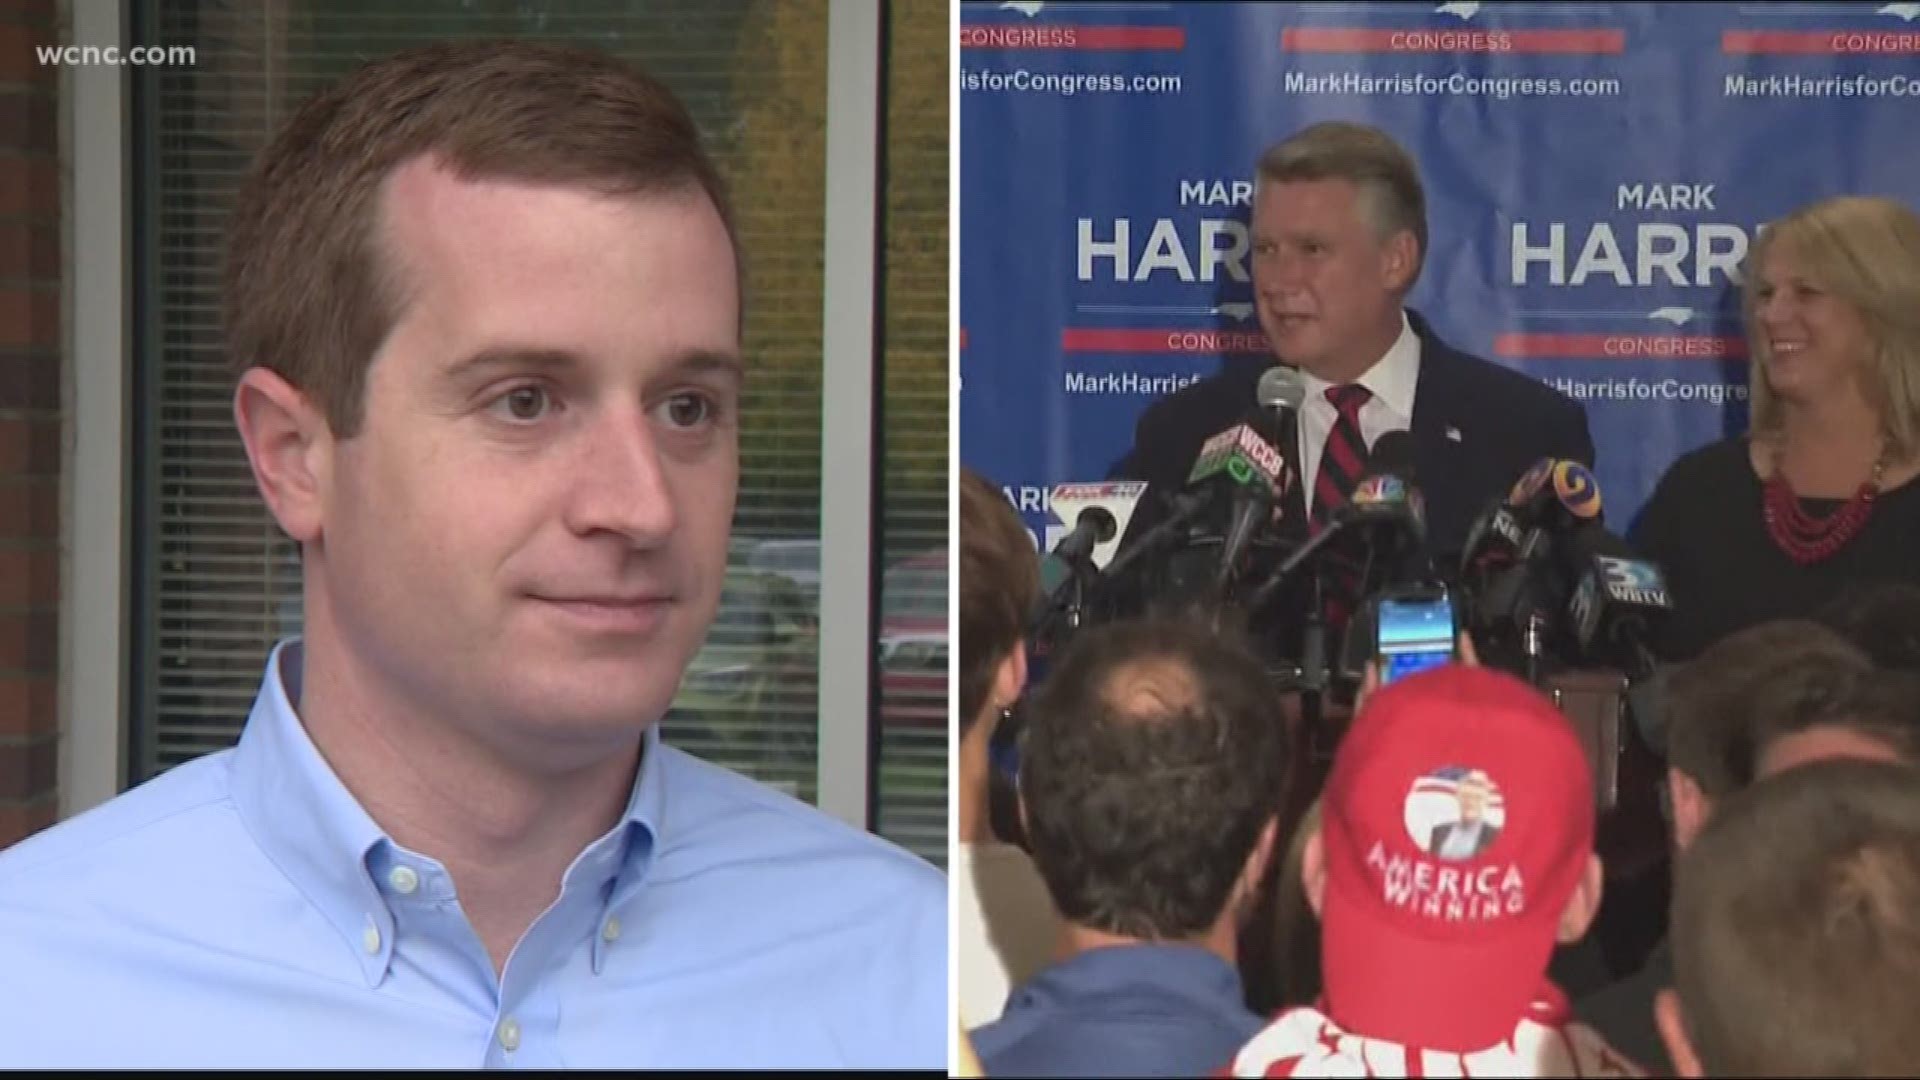 Hundreds of pages were filed by the State Board of Elections and Dan McCready -- all in effort to stop a judge from granting Mark Harris' request to certify the 9th District Race.